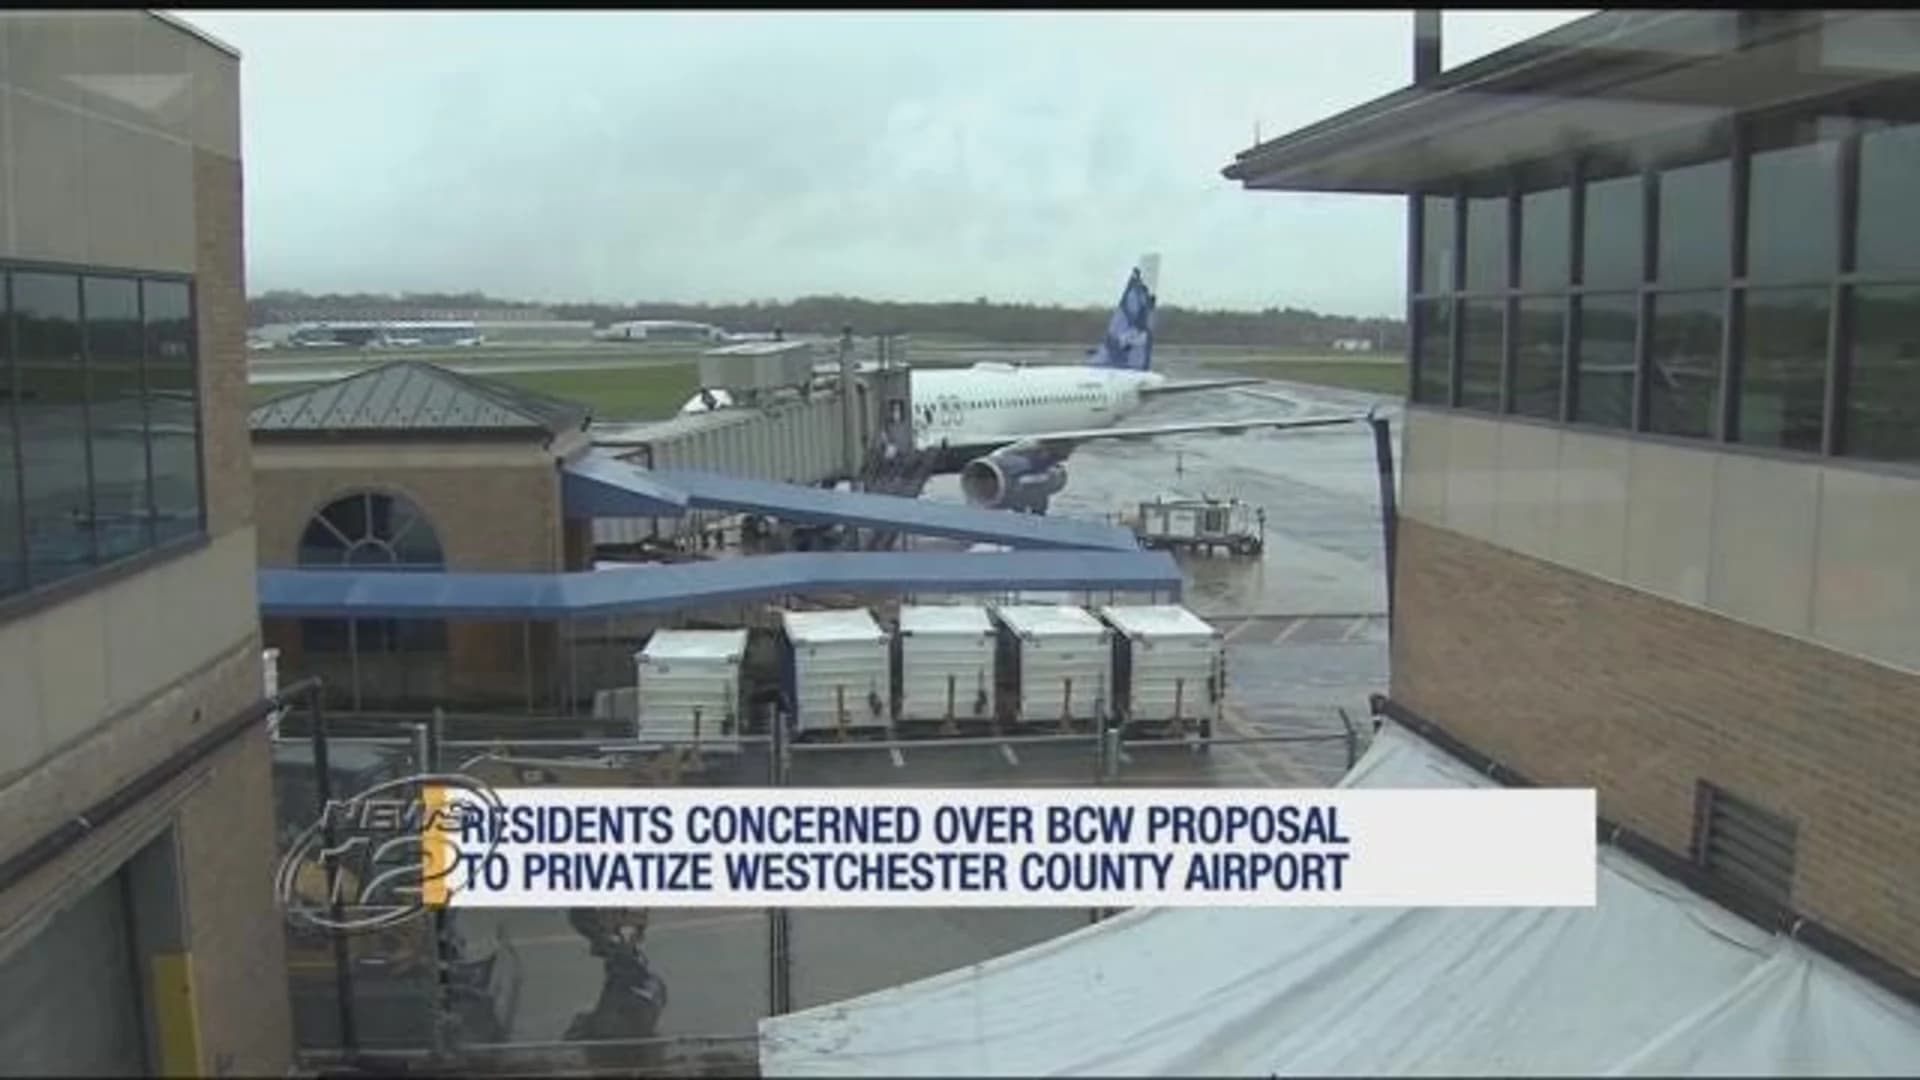 Continuing construction at Westchester County Airport frustrates neighbors